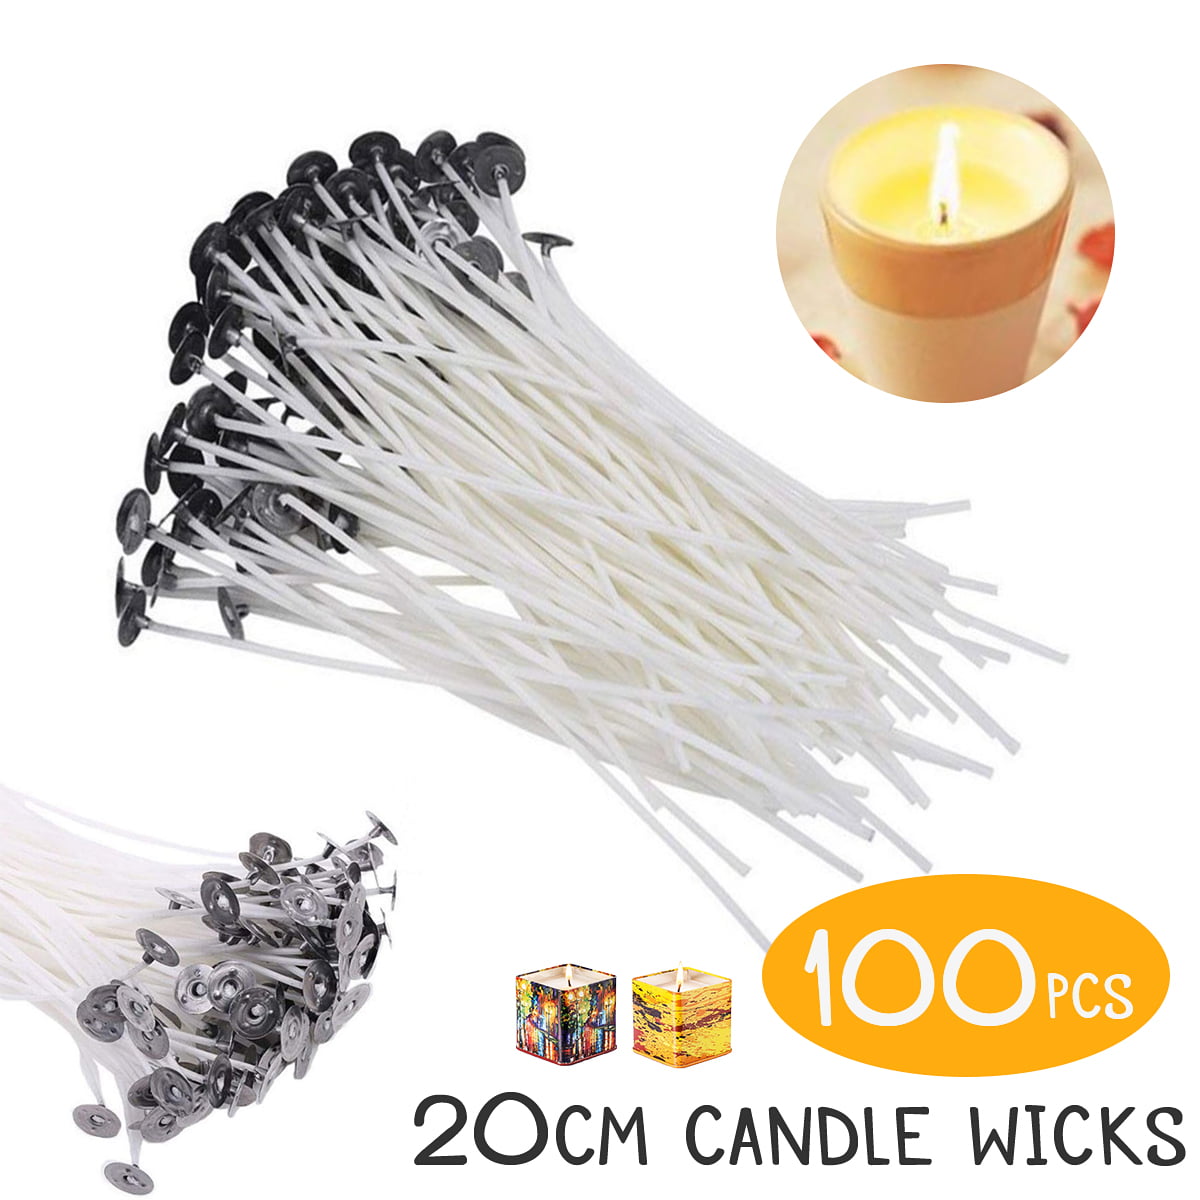 for DIY Candle Making JZK 100 x 200mm Wax Candle Wicks with Base/Sustainer pre-Waxed White Natural Cotton core no Smoke 